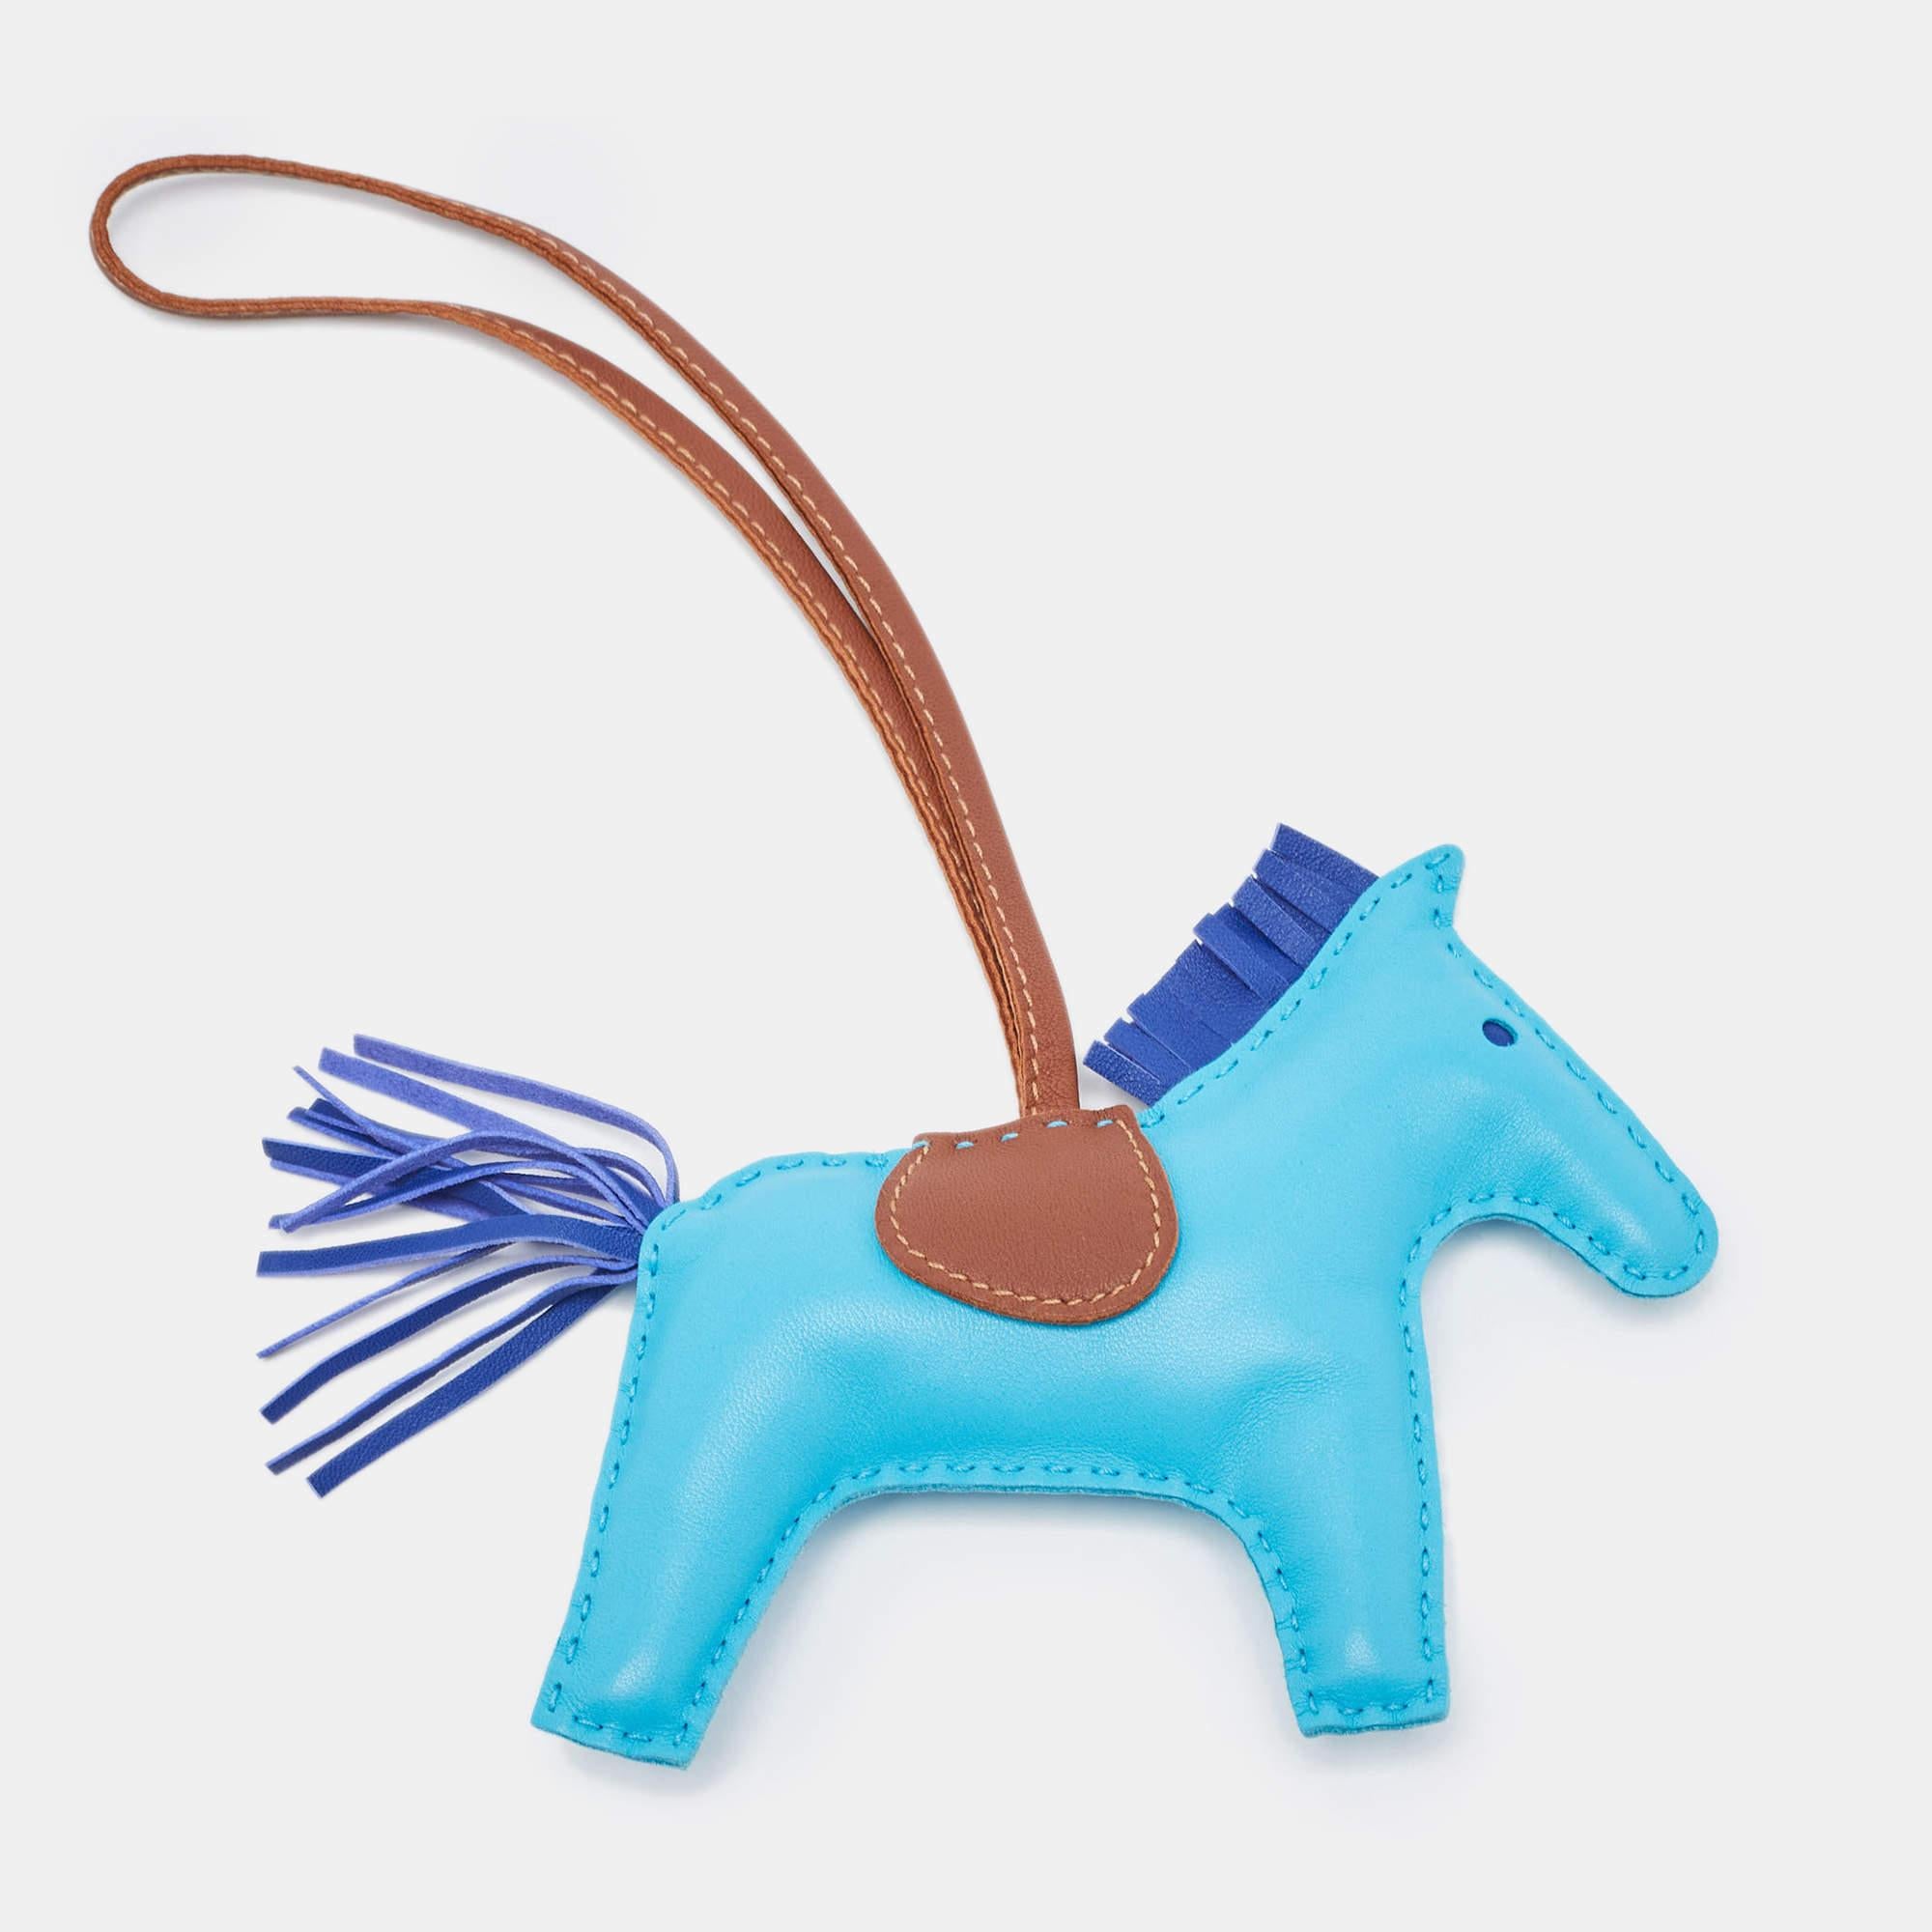 Collected by fans of Hermès and handbags alike, these little galloping charms are dream pieces to dress up one's precious possessions. Hermès pays homage to its equestrian design heritage with this Rodeo Horse. The horse is made using leather of